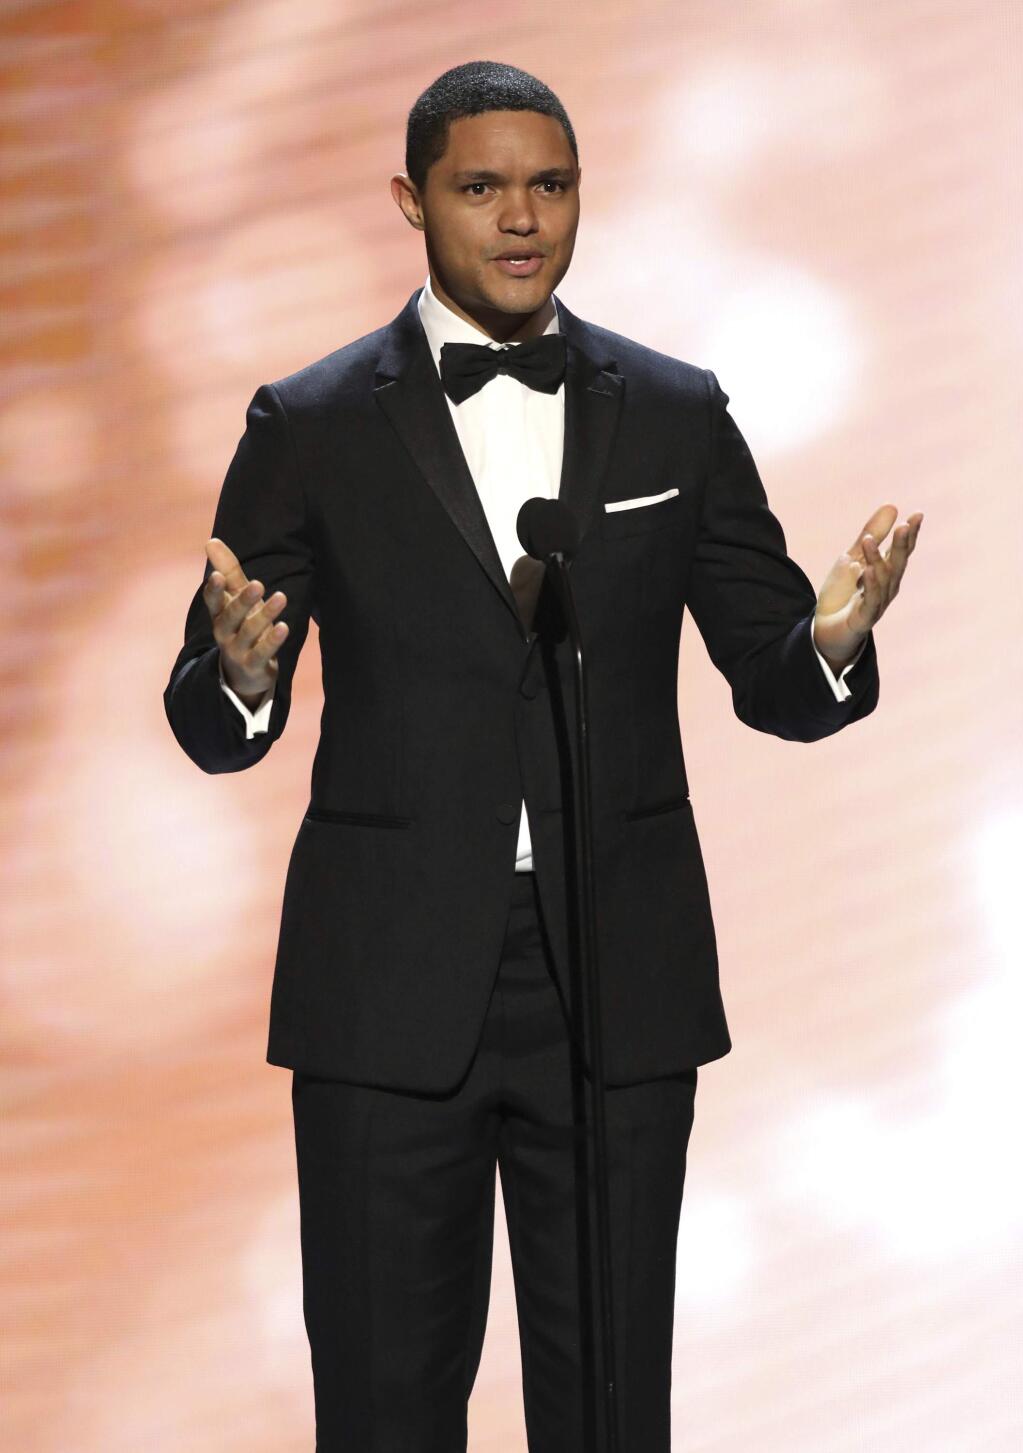 FILE - In this Feb. 11, 2017, file photo, Trevor Noah presents the award for outstanding actress in a comedy series at the 48th annual NAACP Image Awards at the Pasadena Civic Auditorium in Pasadena, Calif. Late-night comics decried the Las Vegas mass shooting as a confoundingly repetitive American tragedy, with Jimmy Kimmel and Noah lashing out at politicians who oppose gun control. They spoke out on Monday, Oct. 2, the day after the worst shooting in modern U.S. history. (Photo by Matt Sayles/Invision/AP, File)